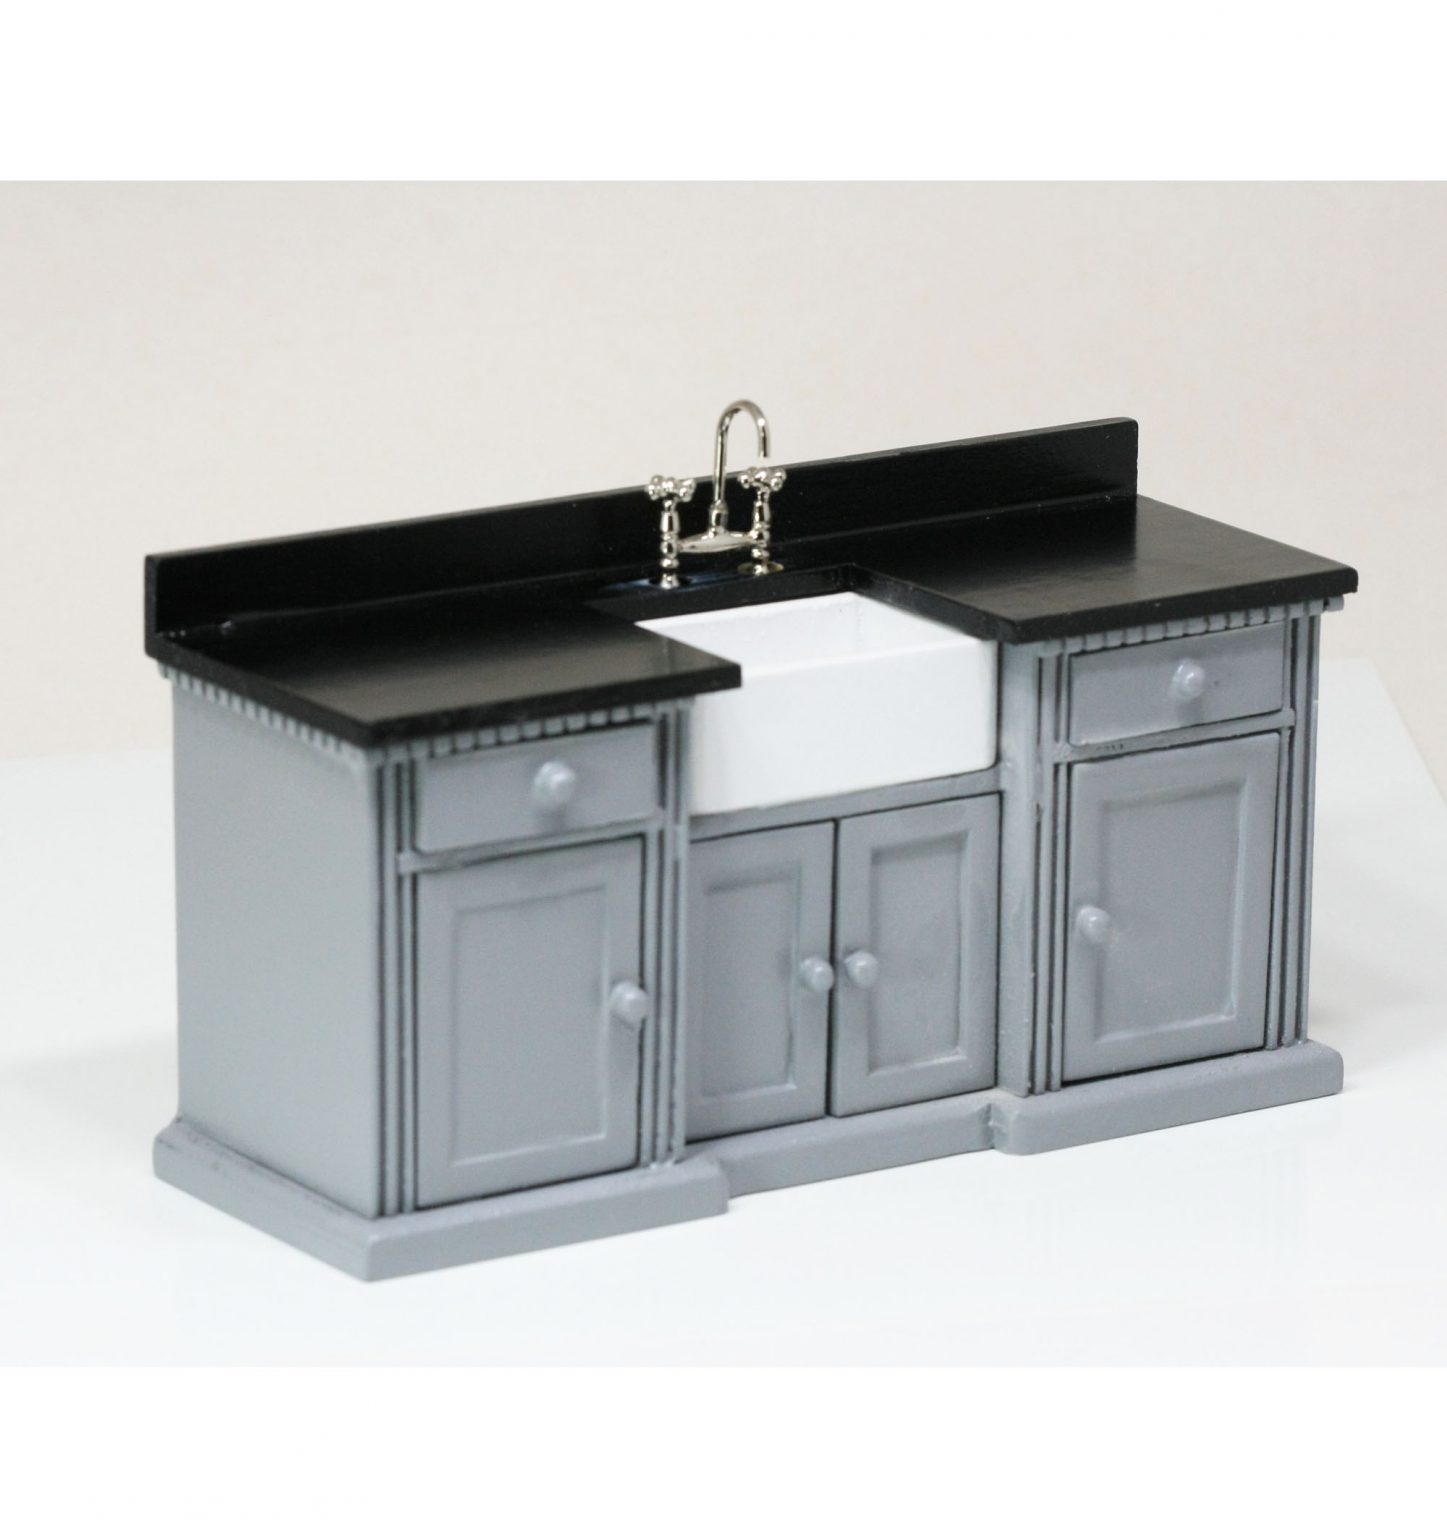 Kitchen Farmhouse Sink Unit in Grey with Black Counter by Town Square ...